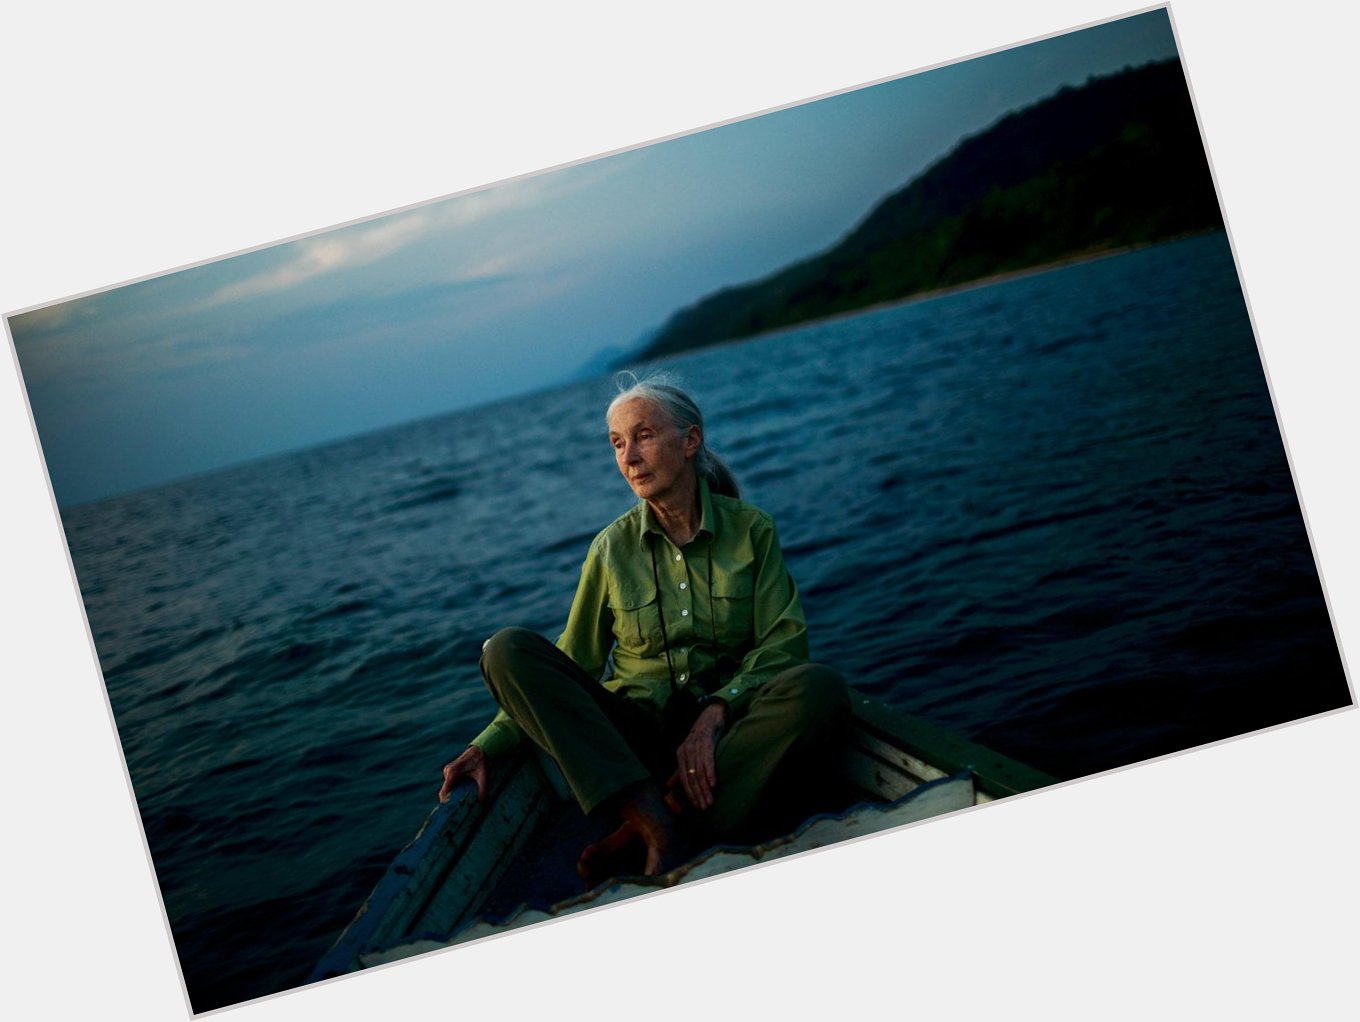 Happy bday Jane Goodall! Thank you revolutionizing the way we see conservation! 